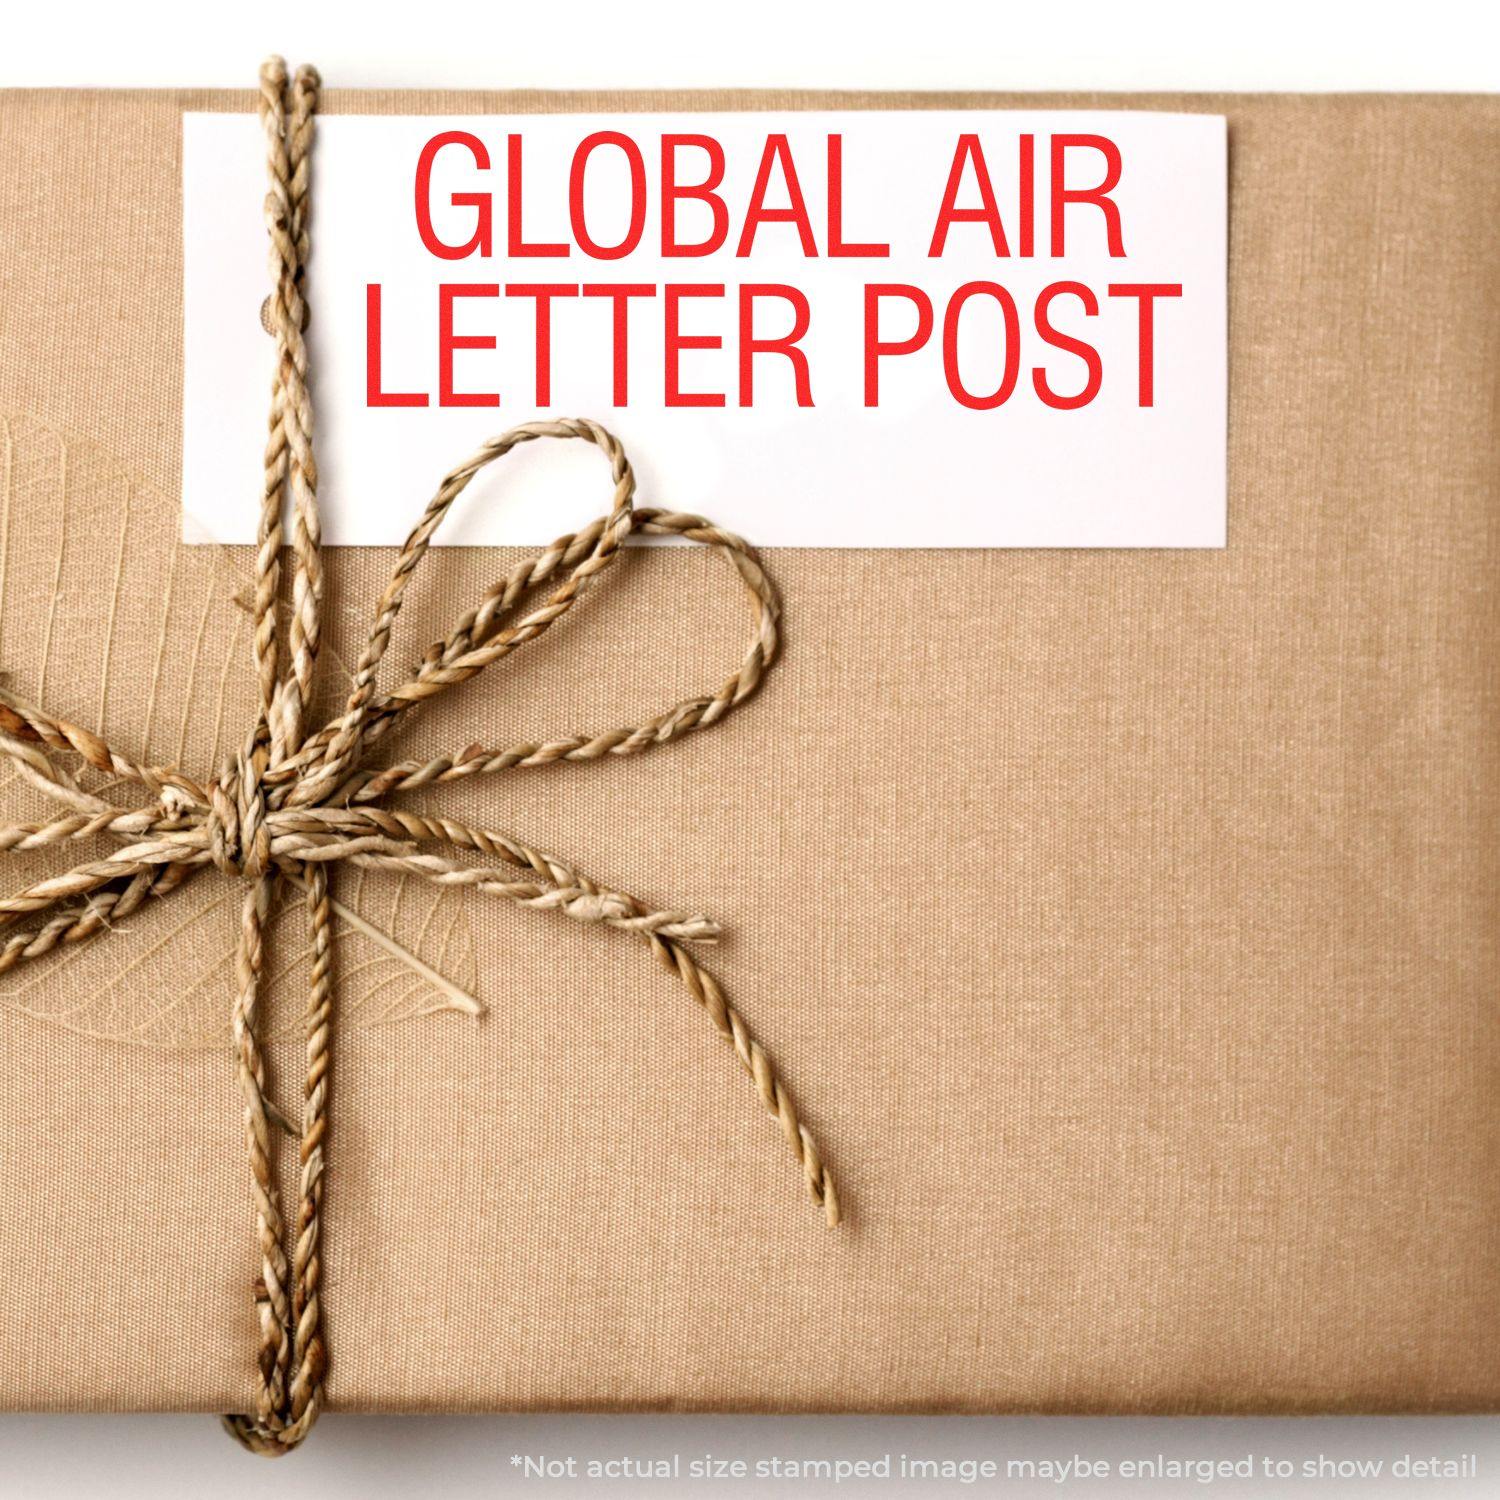 A self-inking stamp with a stamped image showing how the text "GLOBAL AIR LETTER POST" in a large font is displayed by it after stamping.